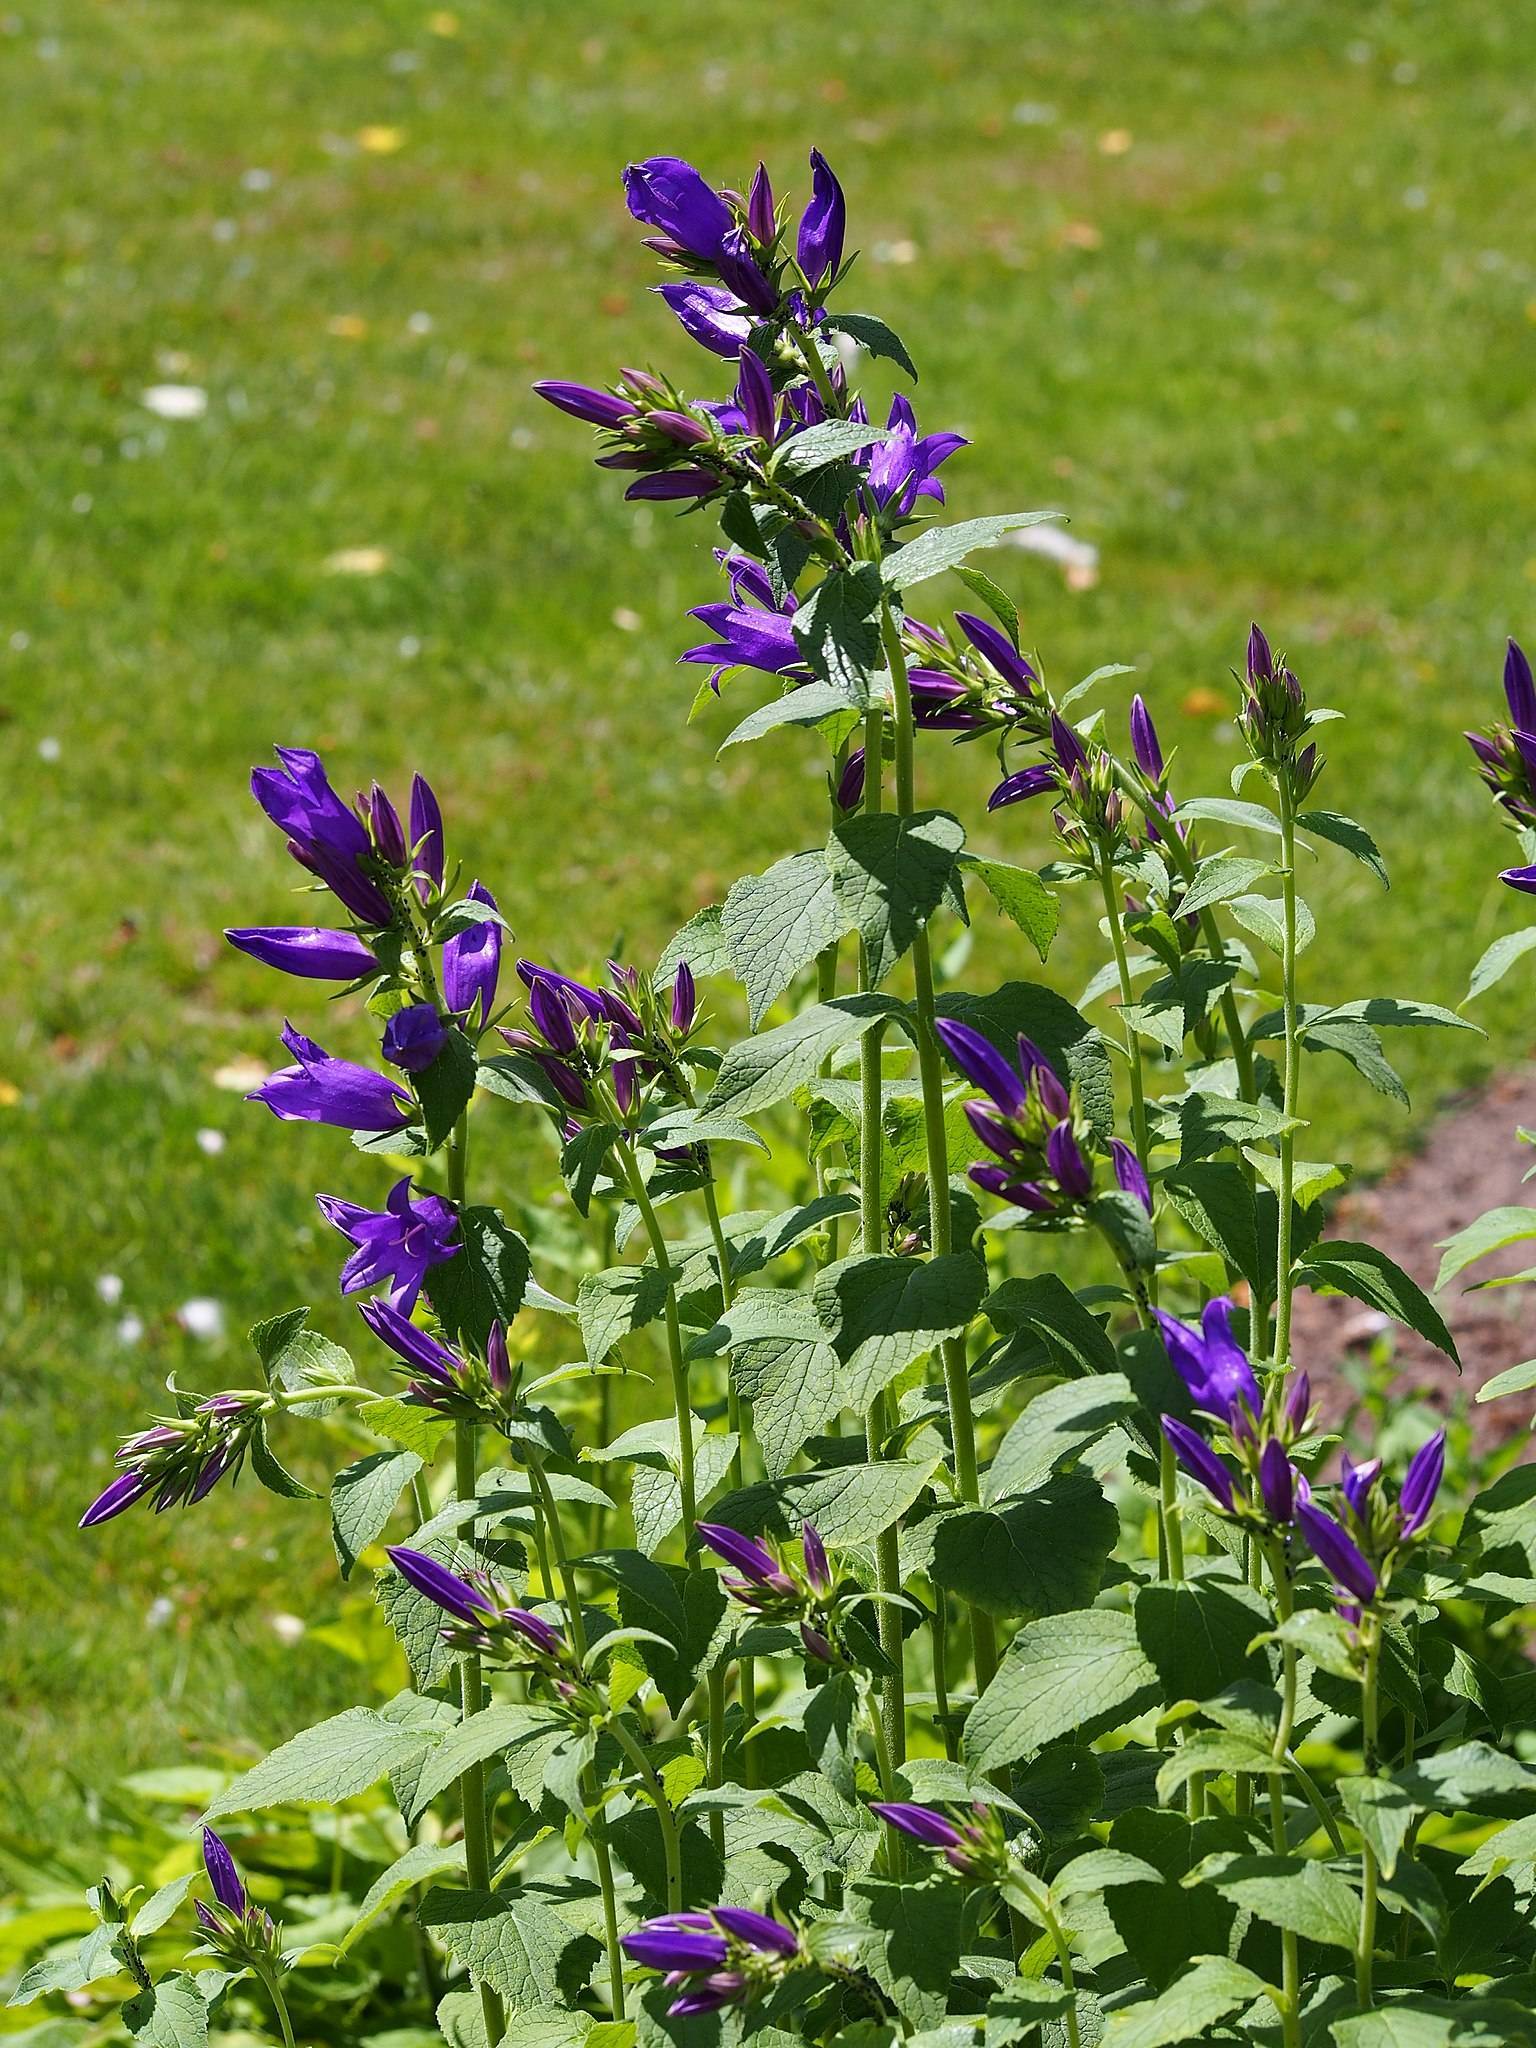 purple-blue flowers and buds with green leaves and stems